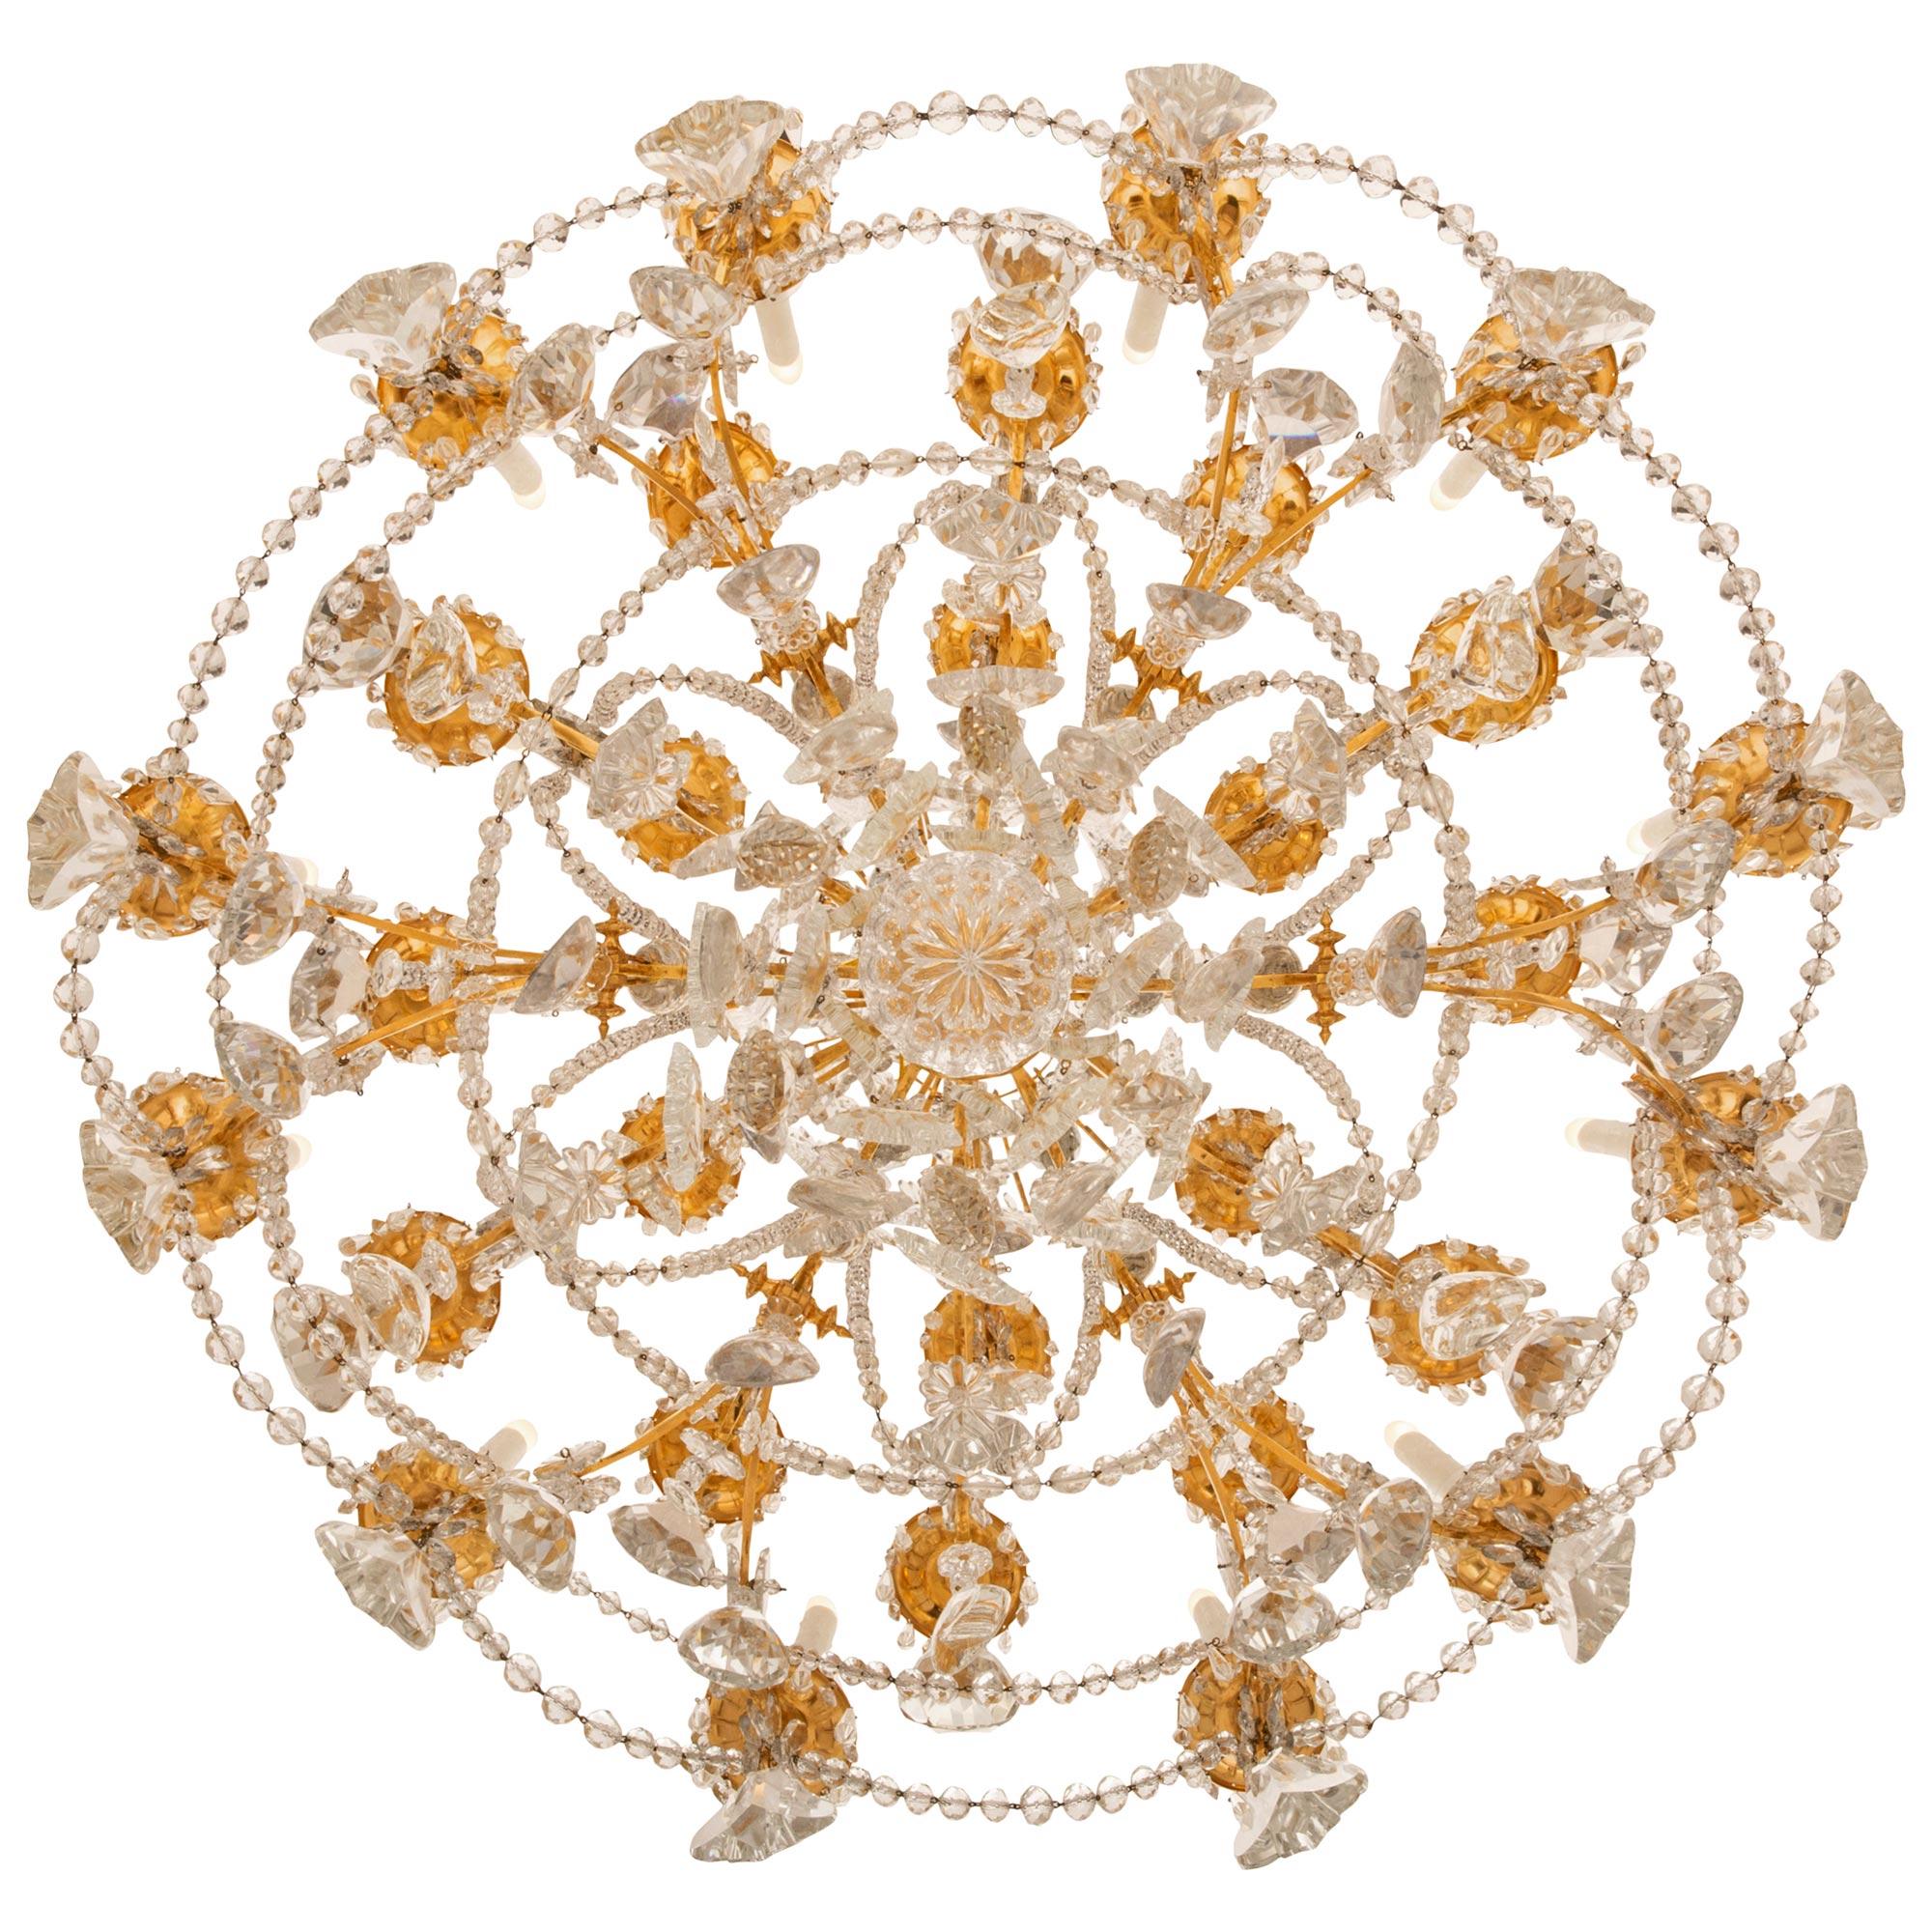 A sensational and grand scaled French mid 19th century Louis XV st. Ormolu and Baccarat crystal chandelier. The thirty light chandelier with a striking crystal central fut is surrounded by six central supporting scrolled arms which split at the